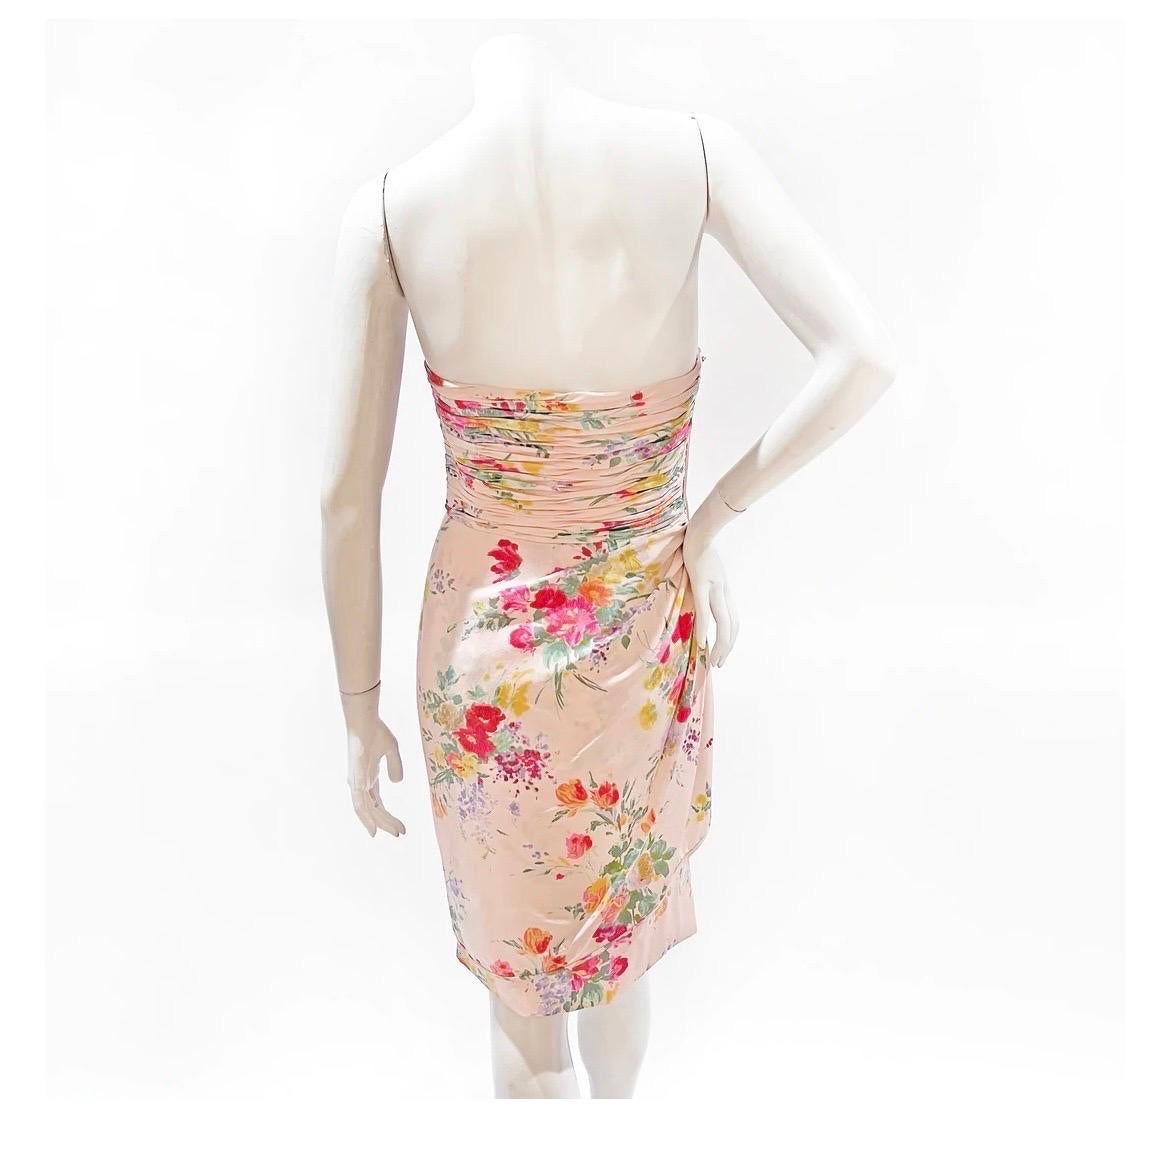 Vintage pink floral strapless dress by Emanuel Ungaro 
Circa 1980's- early 1990's
Made in Italy 
100% silk 
Synthetic lining
Strapless 
Pale pink with multicolor floral print 
Ruched to waist 
Back zip closure
Drape detail on right hip
Excellent